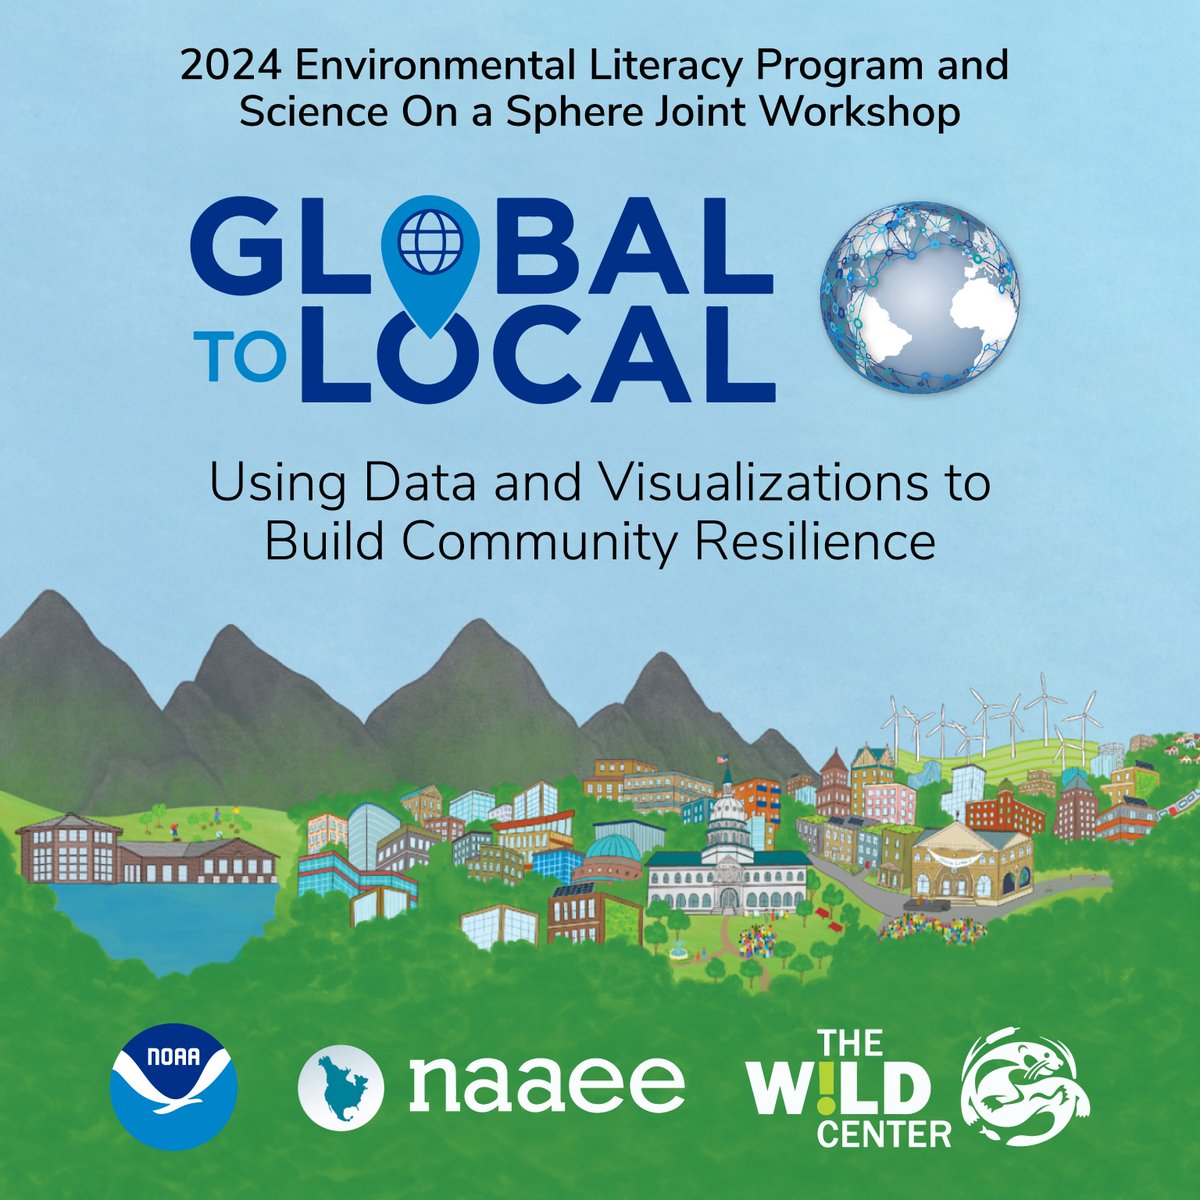 We are excited for this week’s workshop at @WildCenter! NOAA Environmental Literacy Program grantees and the Science On a Sphere Users Collaborative Network will explore the use of data and data viz to enhance community resilience, from global to local. #ELPSOSWorkshop2024